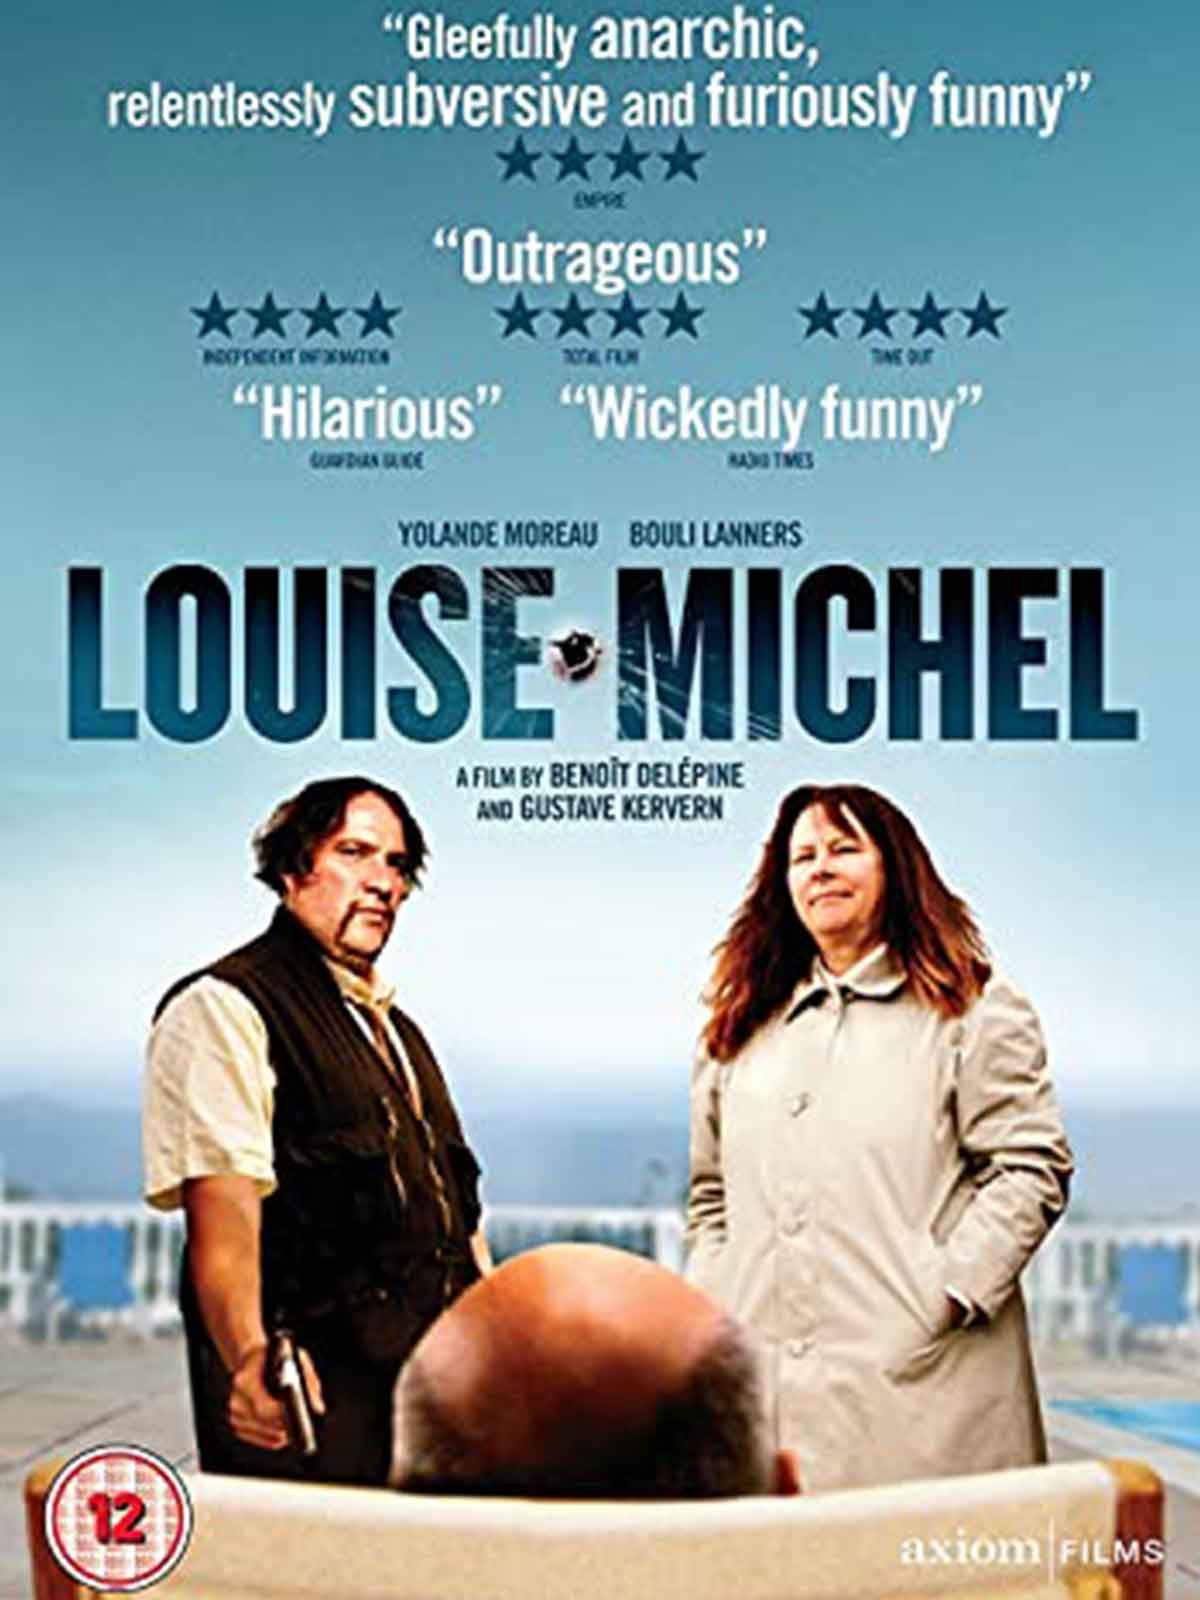 Poster of the film Louise Michel